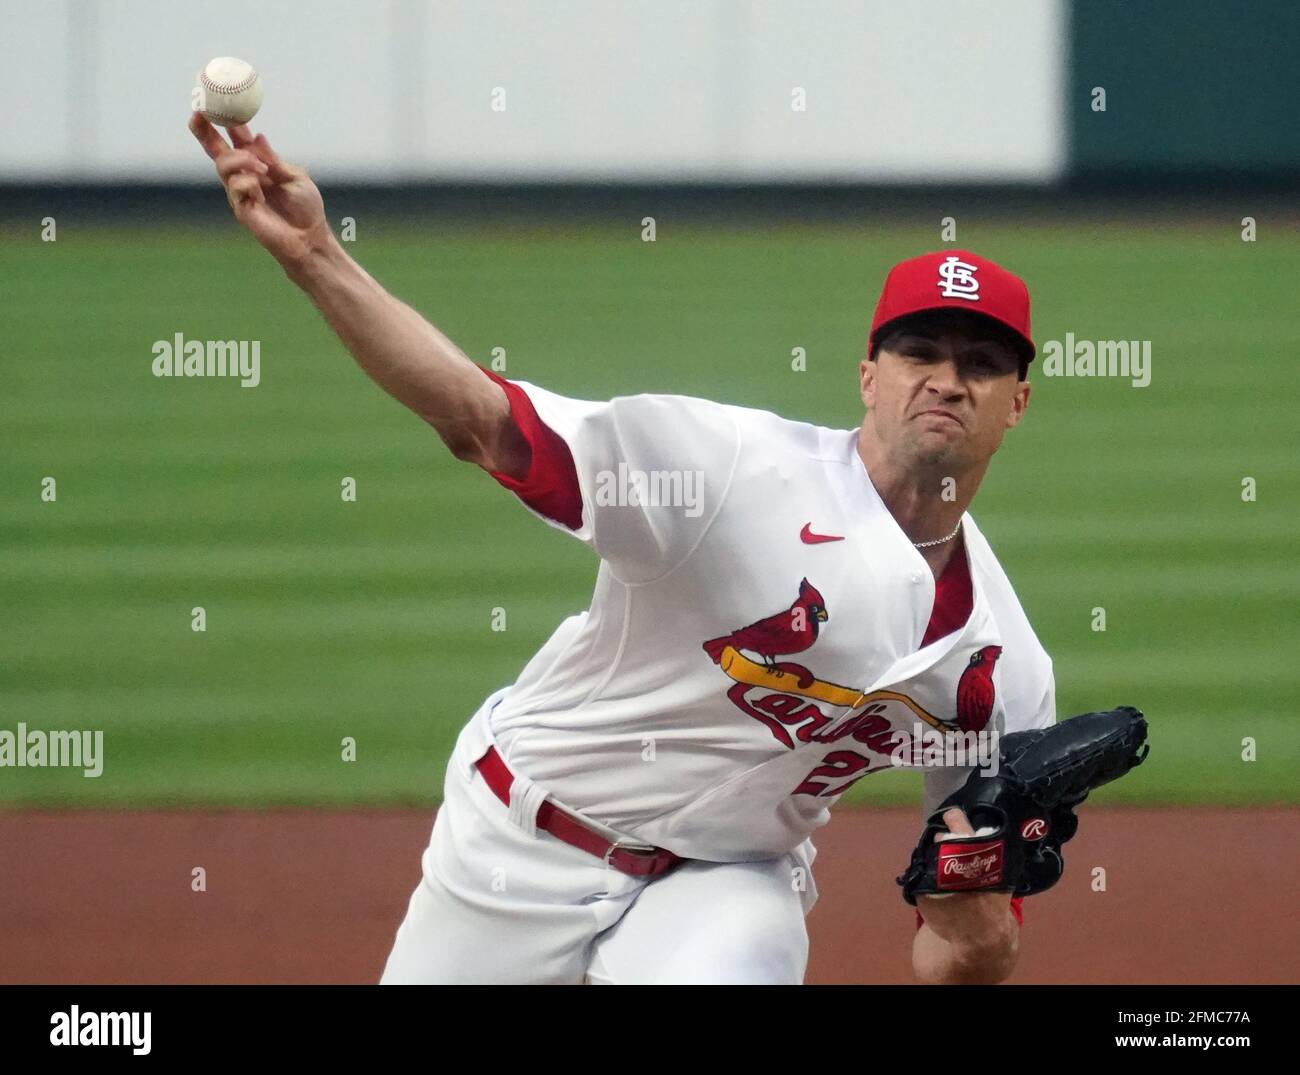 Jack Flaherty, Today is special for St. Louis Cardinals pitcher Jack  Flaherty. For the first time in years he'll spend Mother's Day at home with  the incredible woman